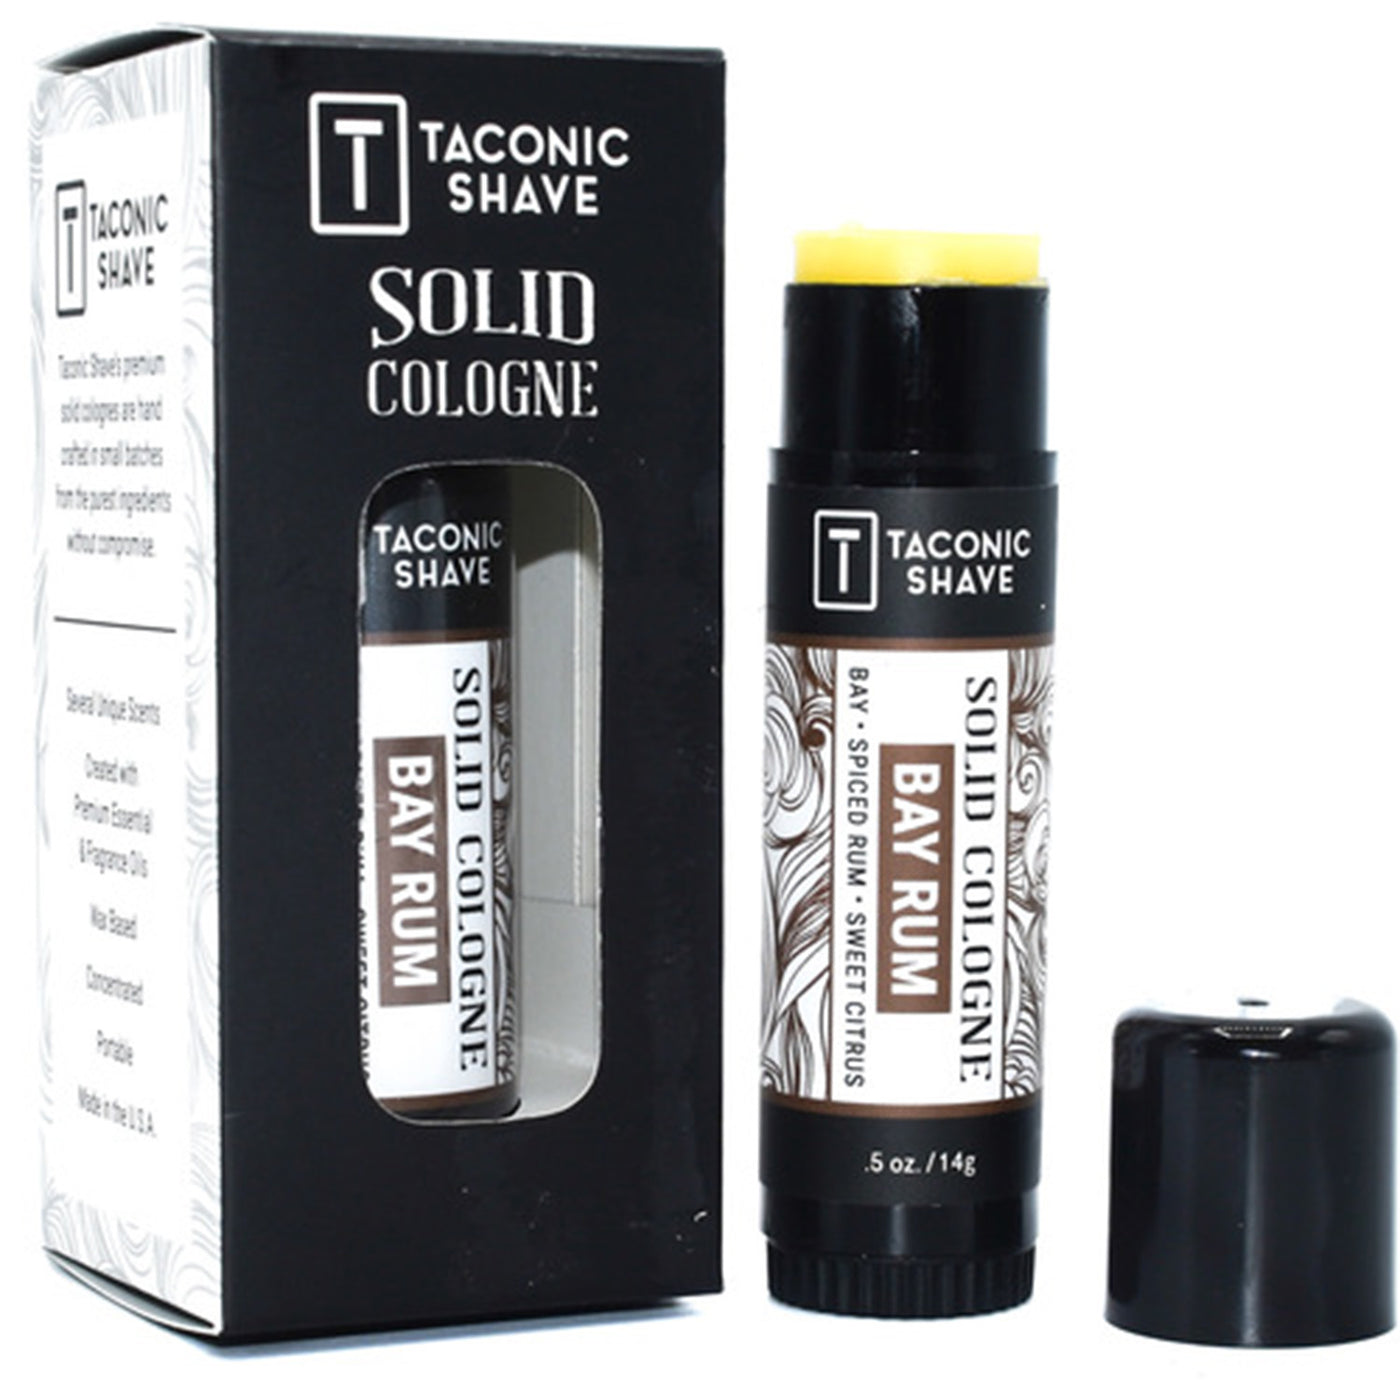  Taconic Shave Bay Rum Solid Cologne by Taconic Shave sold by Naked Armor Razors